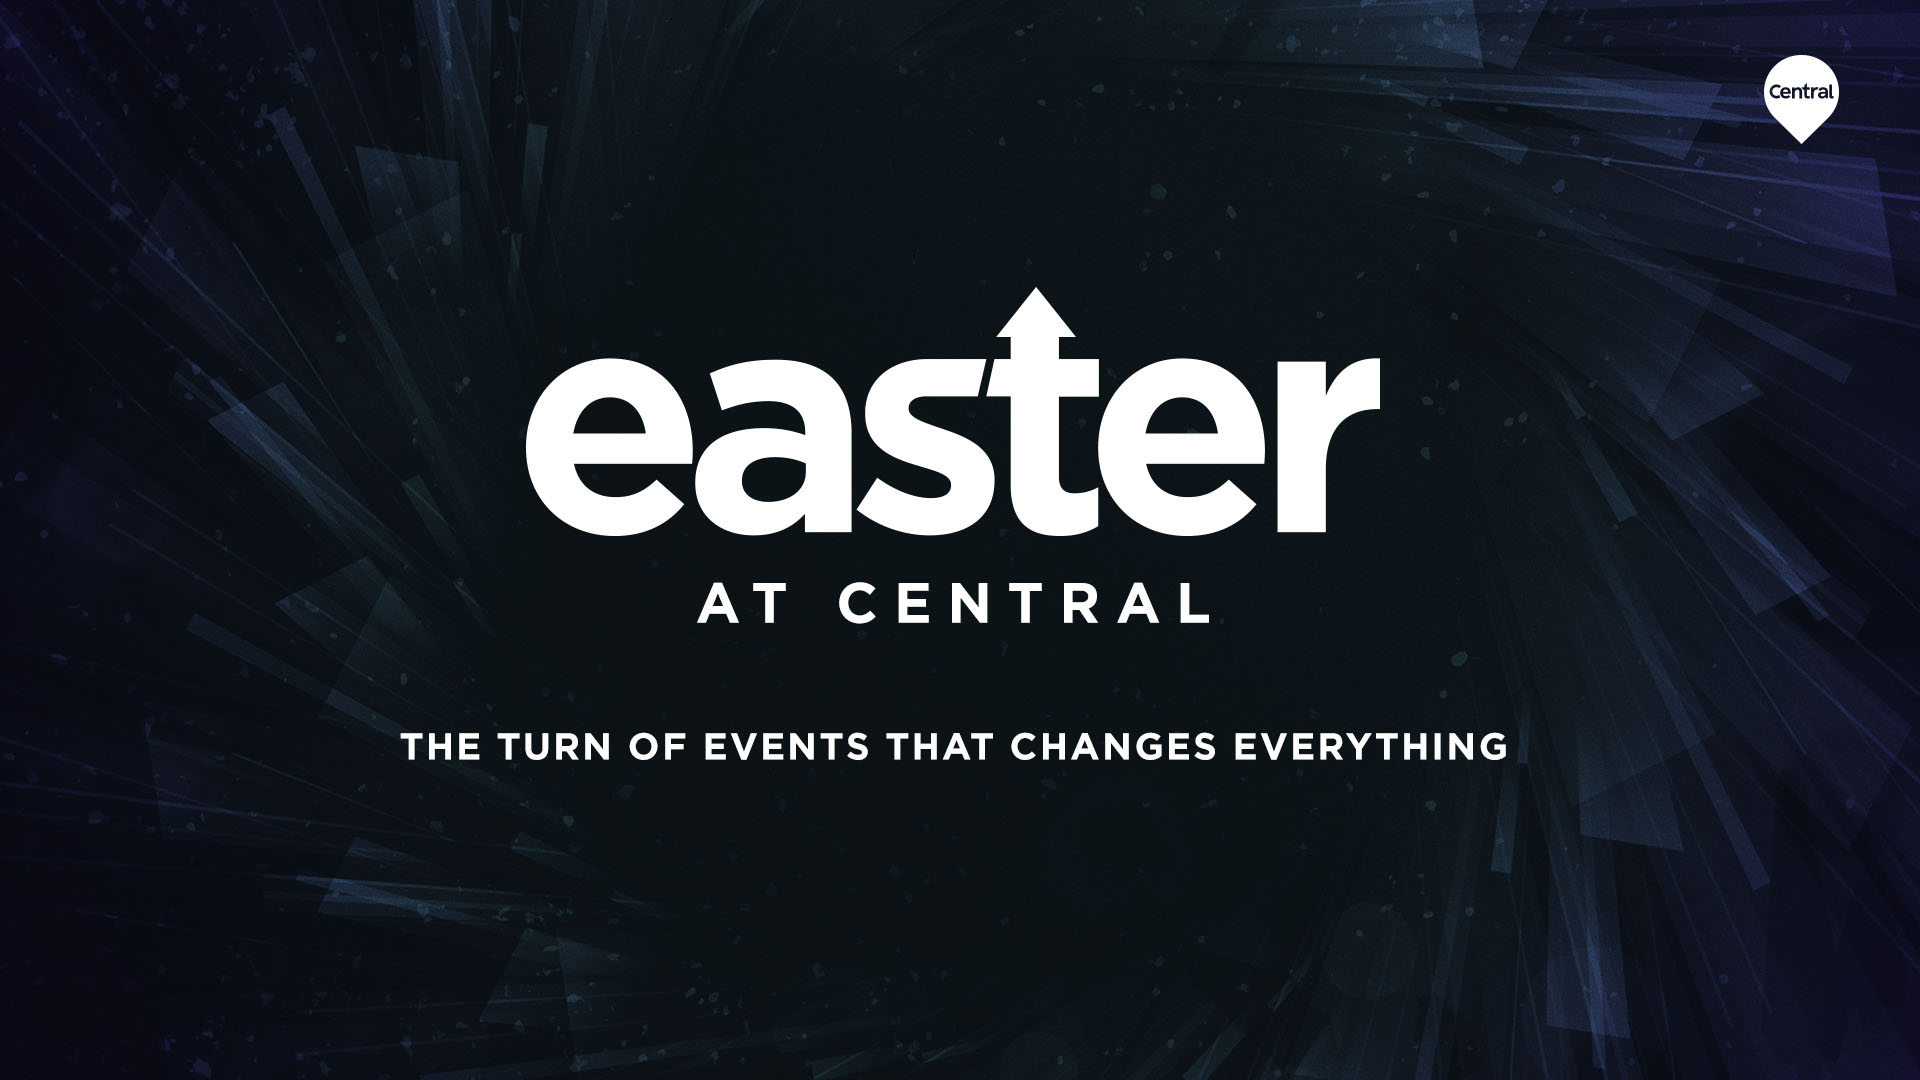     EASTER AT CENTRAL